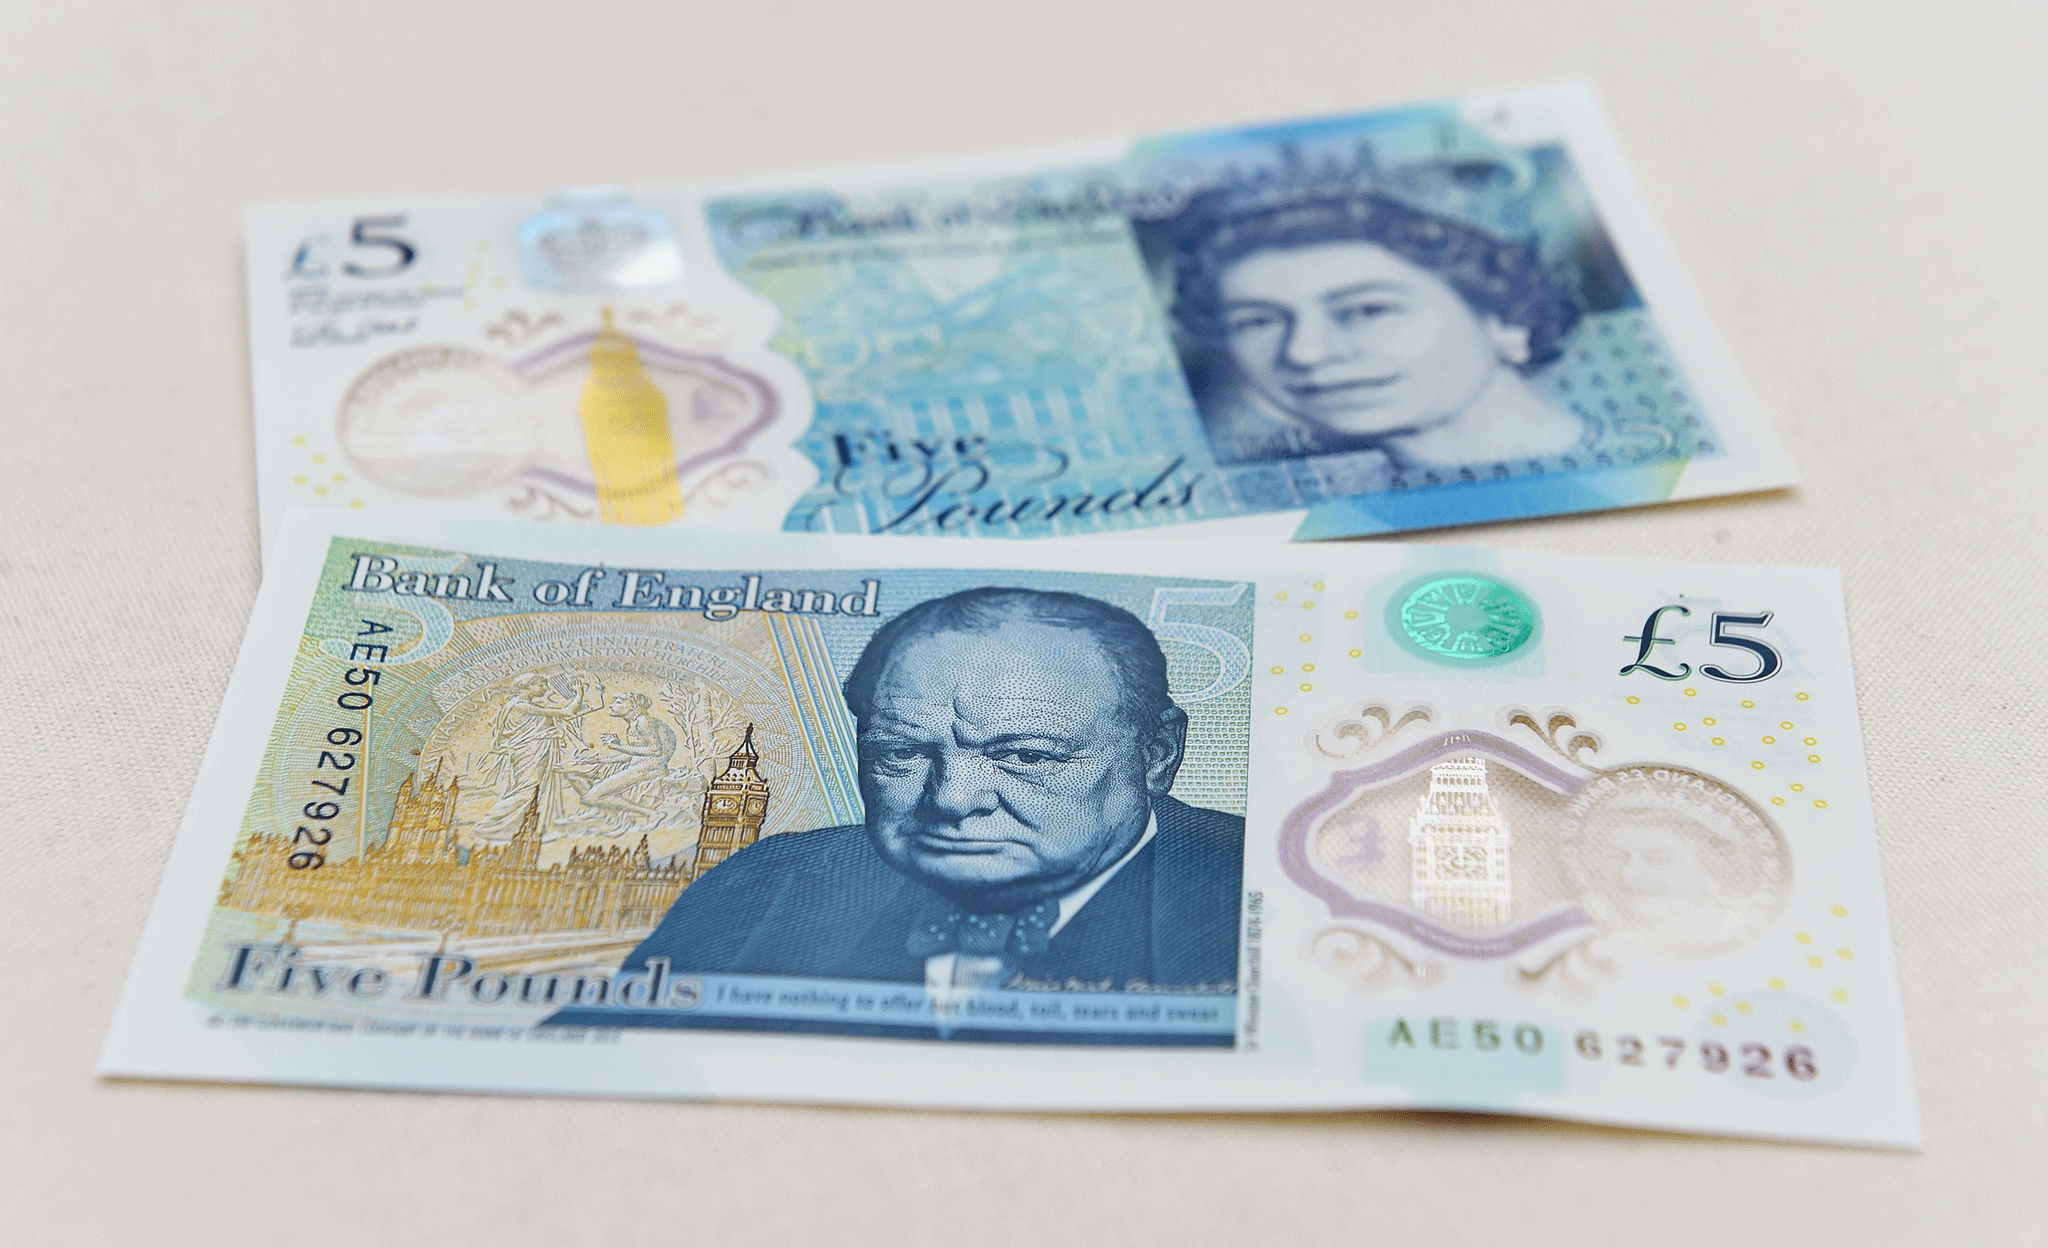 If you have an old £5 note, you only have a few days left to spend it